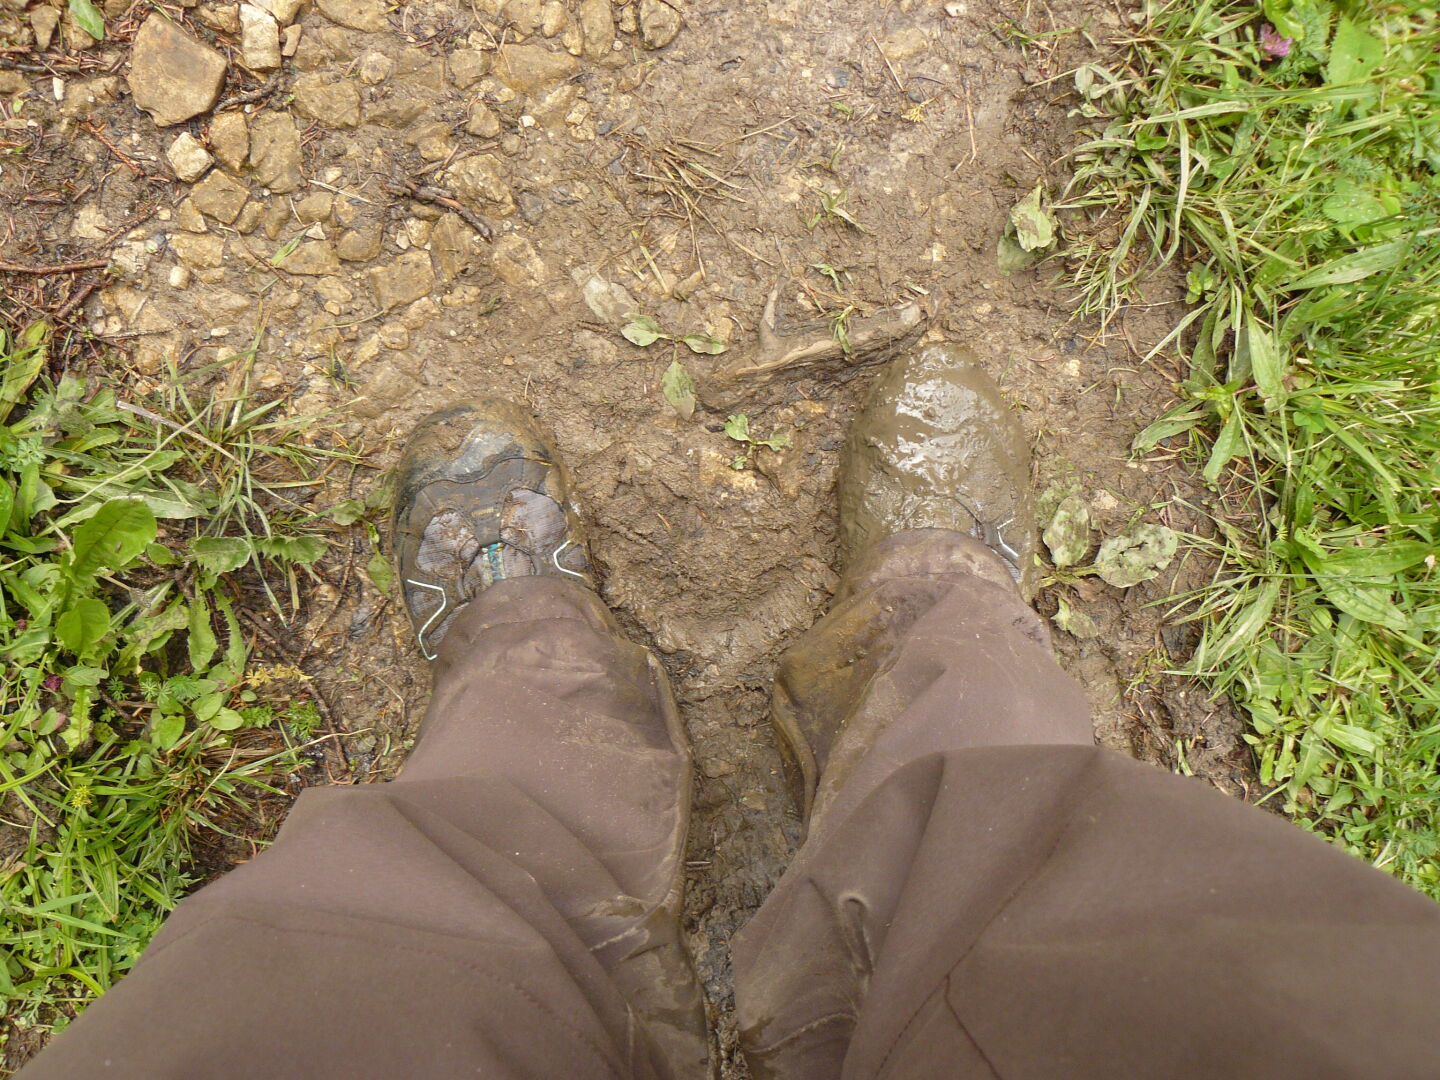 ... and muddy shoes. They were new a week ago!